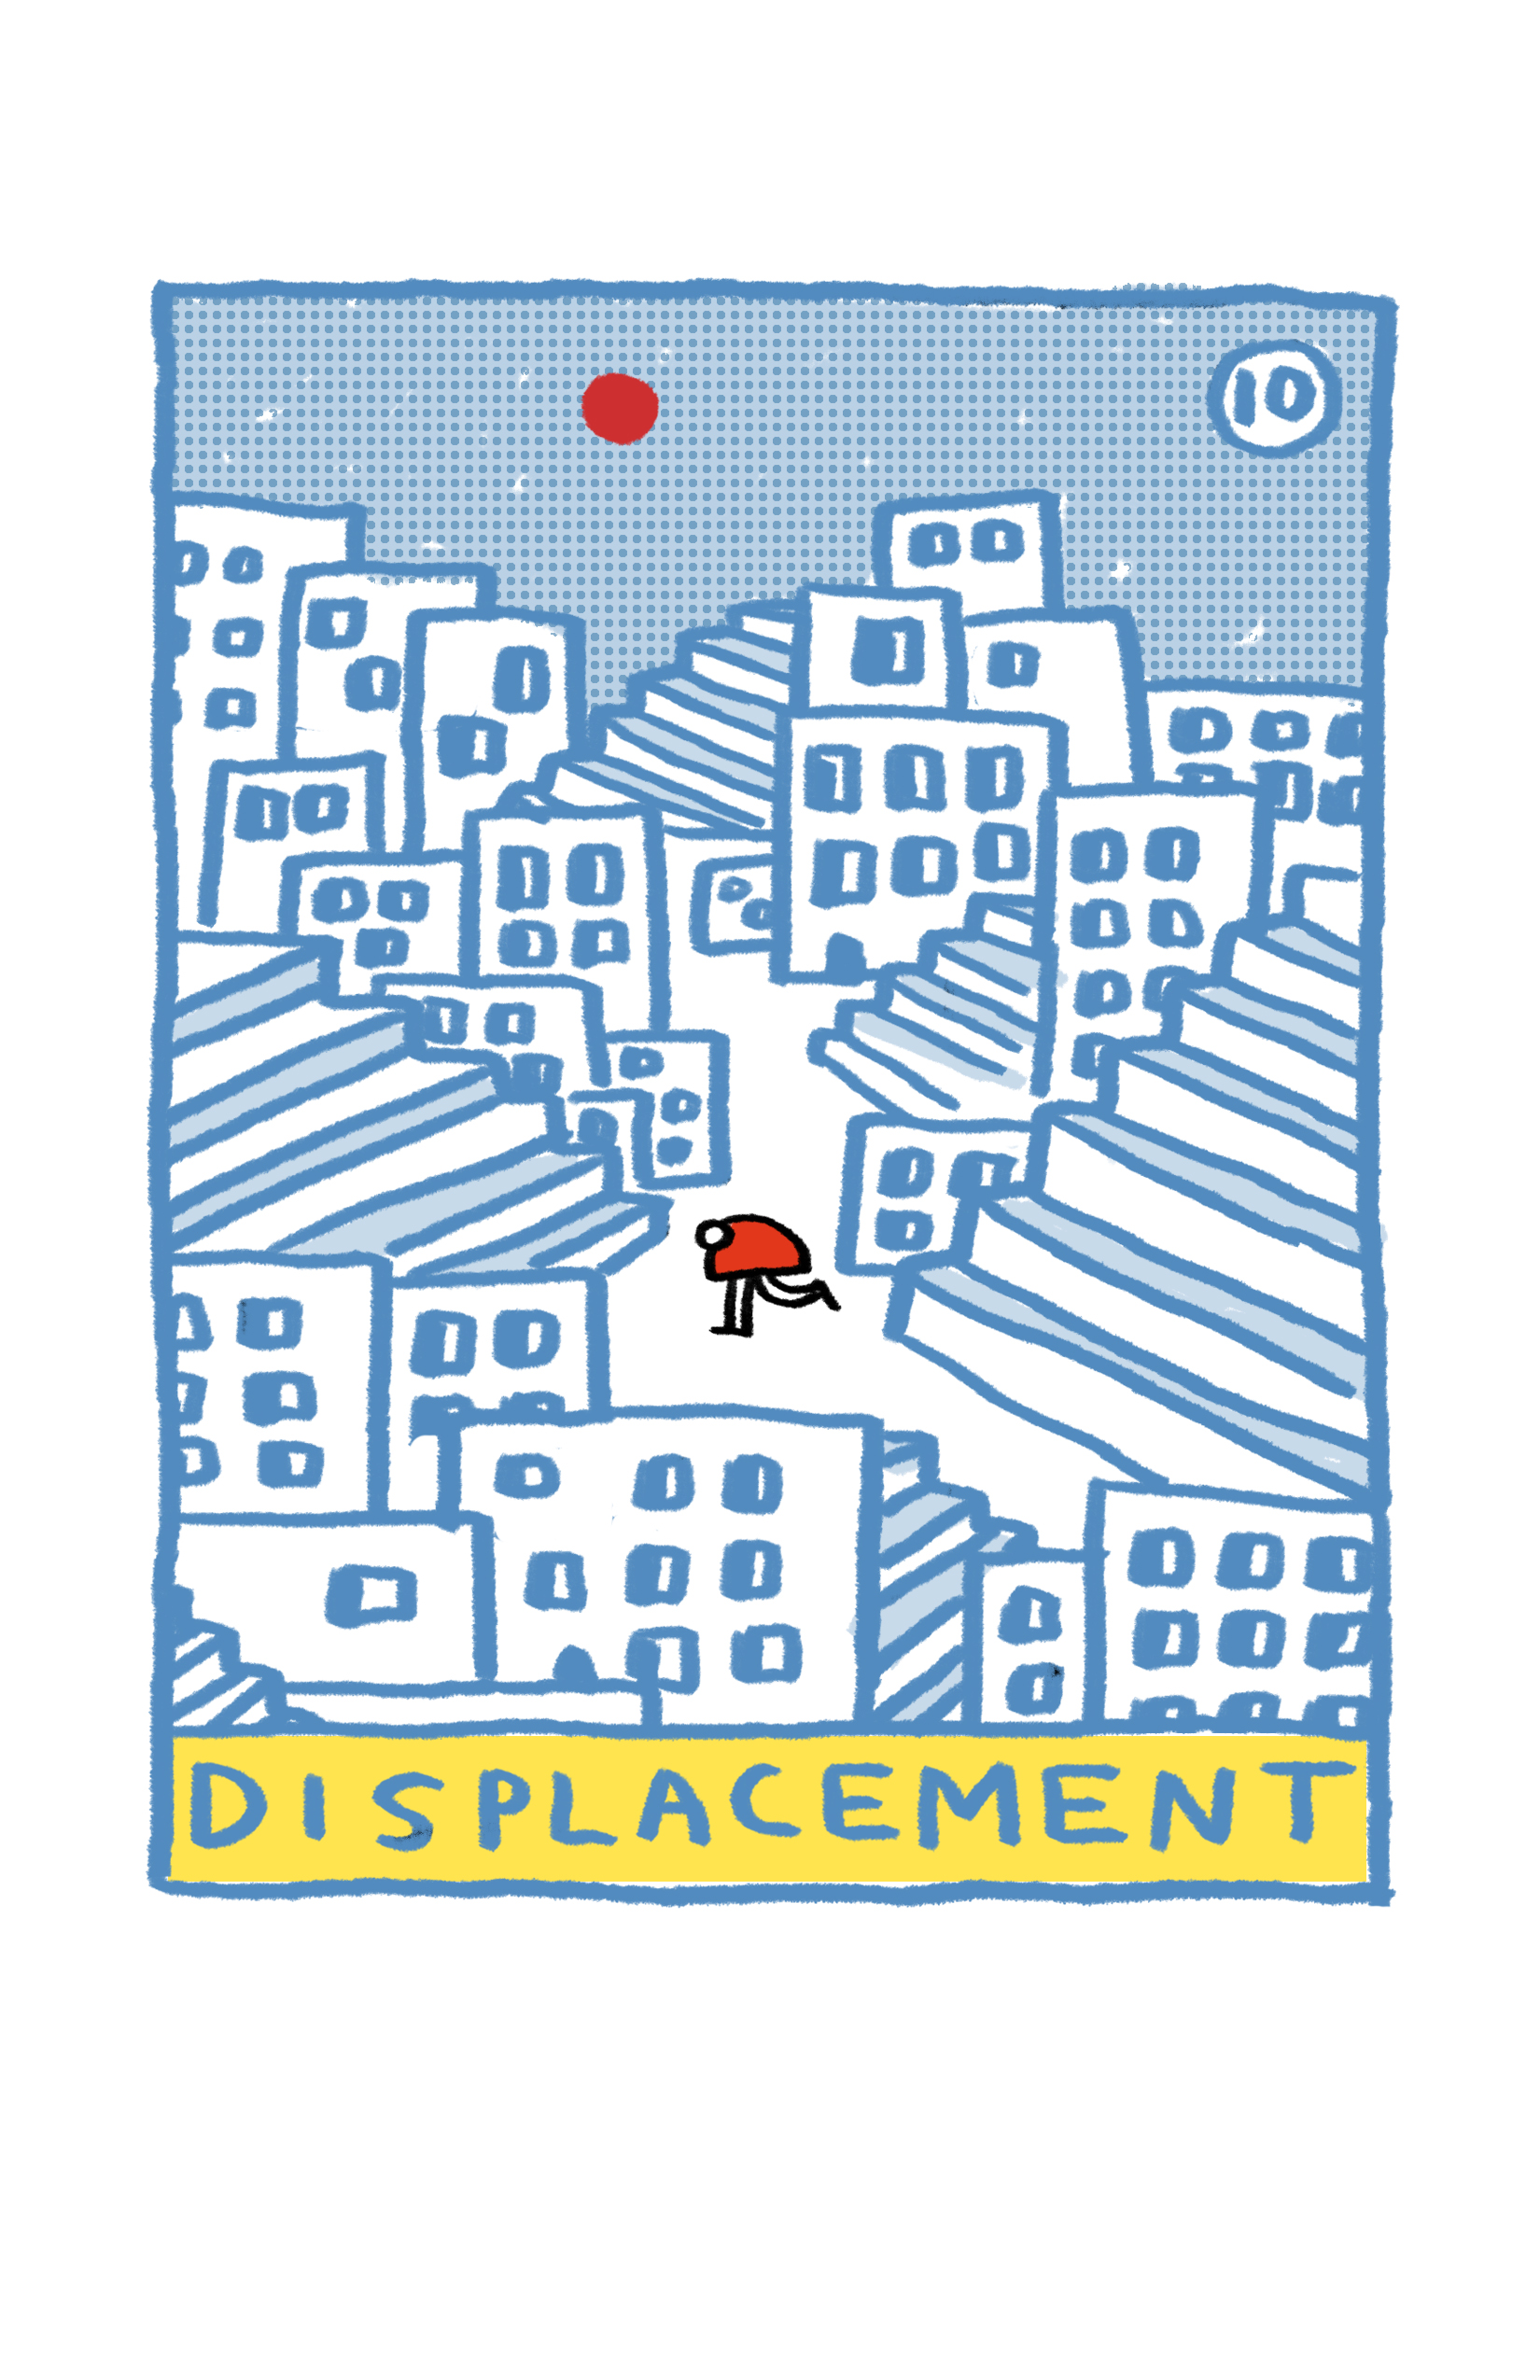  Cover design for the tenth issue of  Displacement  